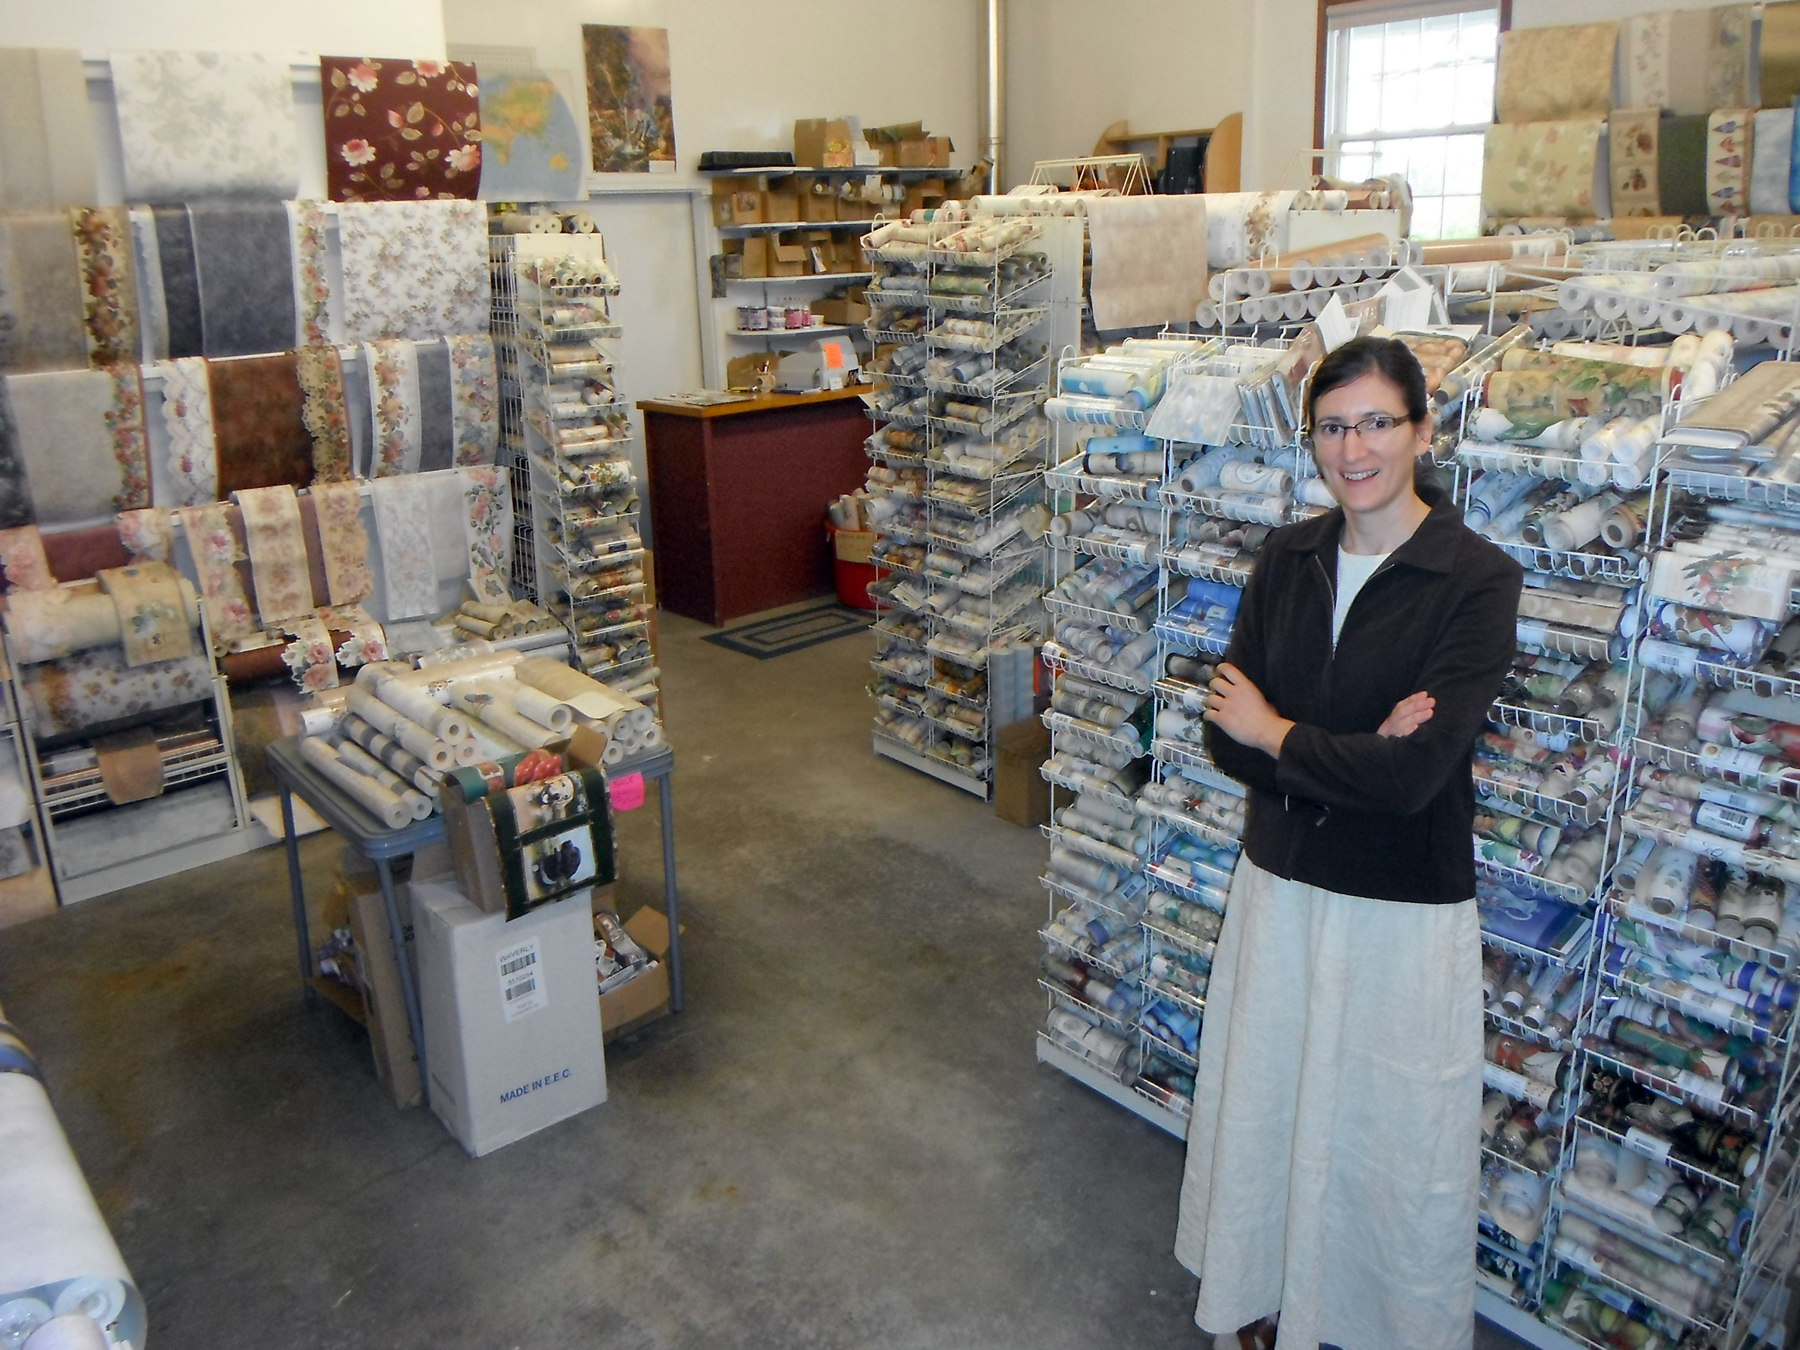 Owner Lucille Wideman will let you take some sample rolls home and 1800x1350